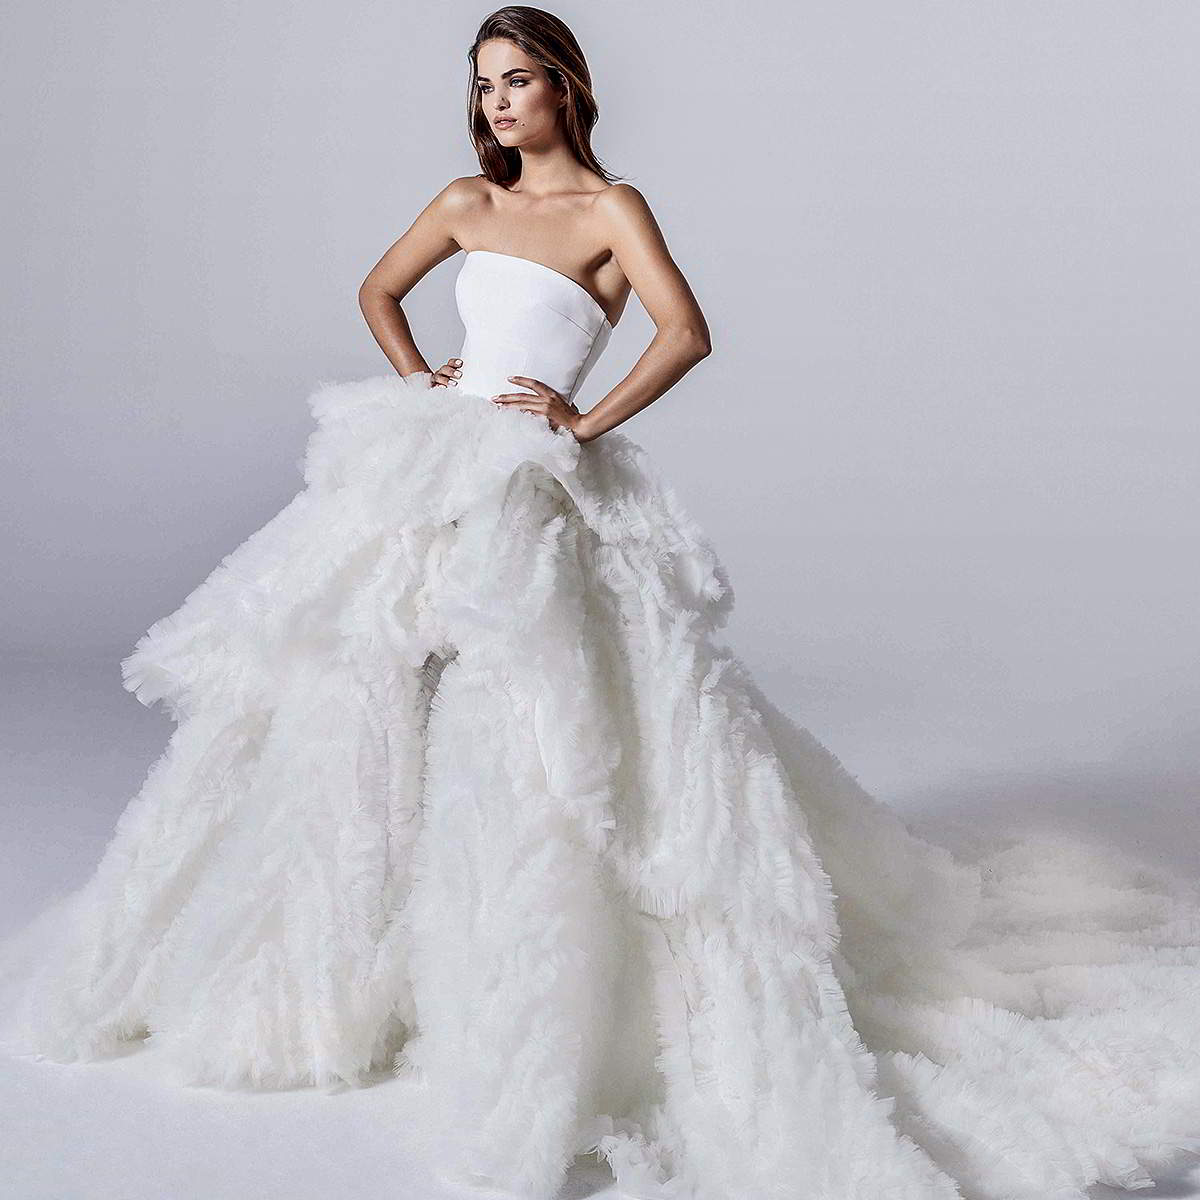 nicole and felicia fall 2020 bridal collection featured on wedding inspirasi thumbnail